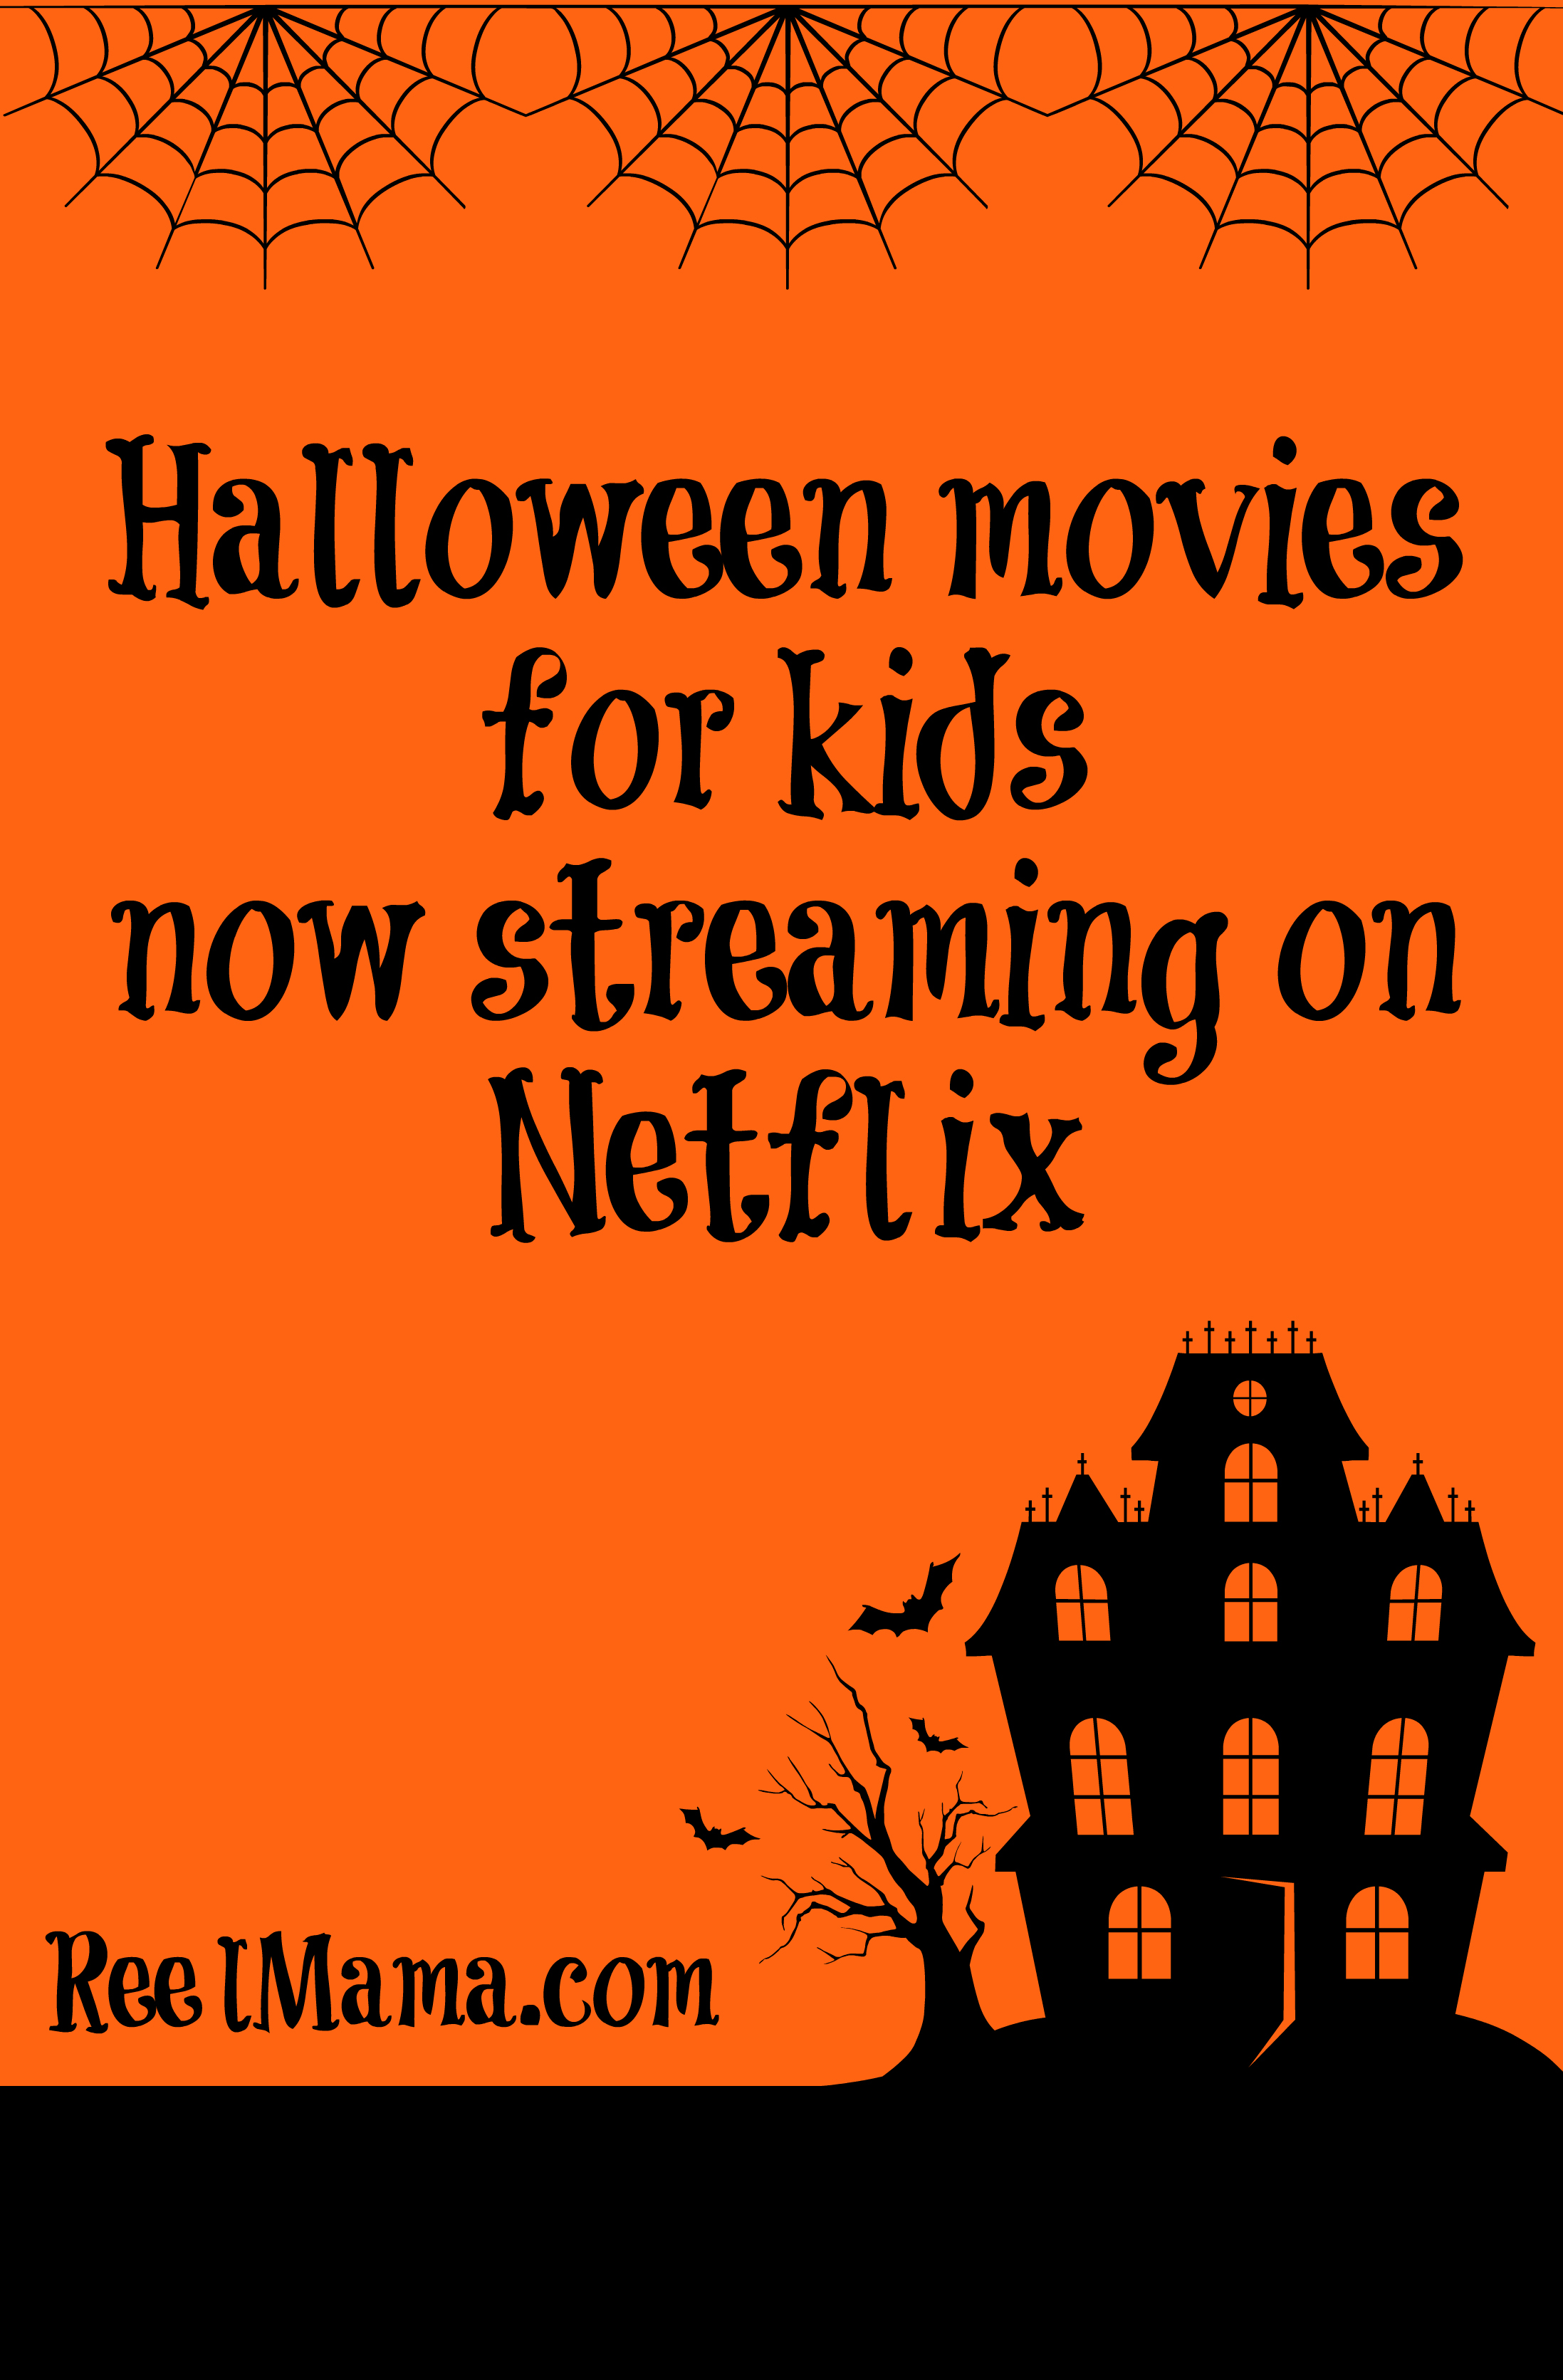 Halloween movies and shows for kids now streaming on Netflix